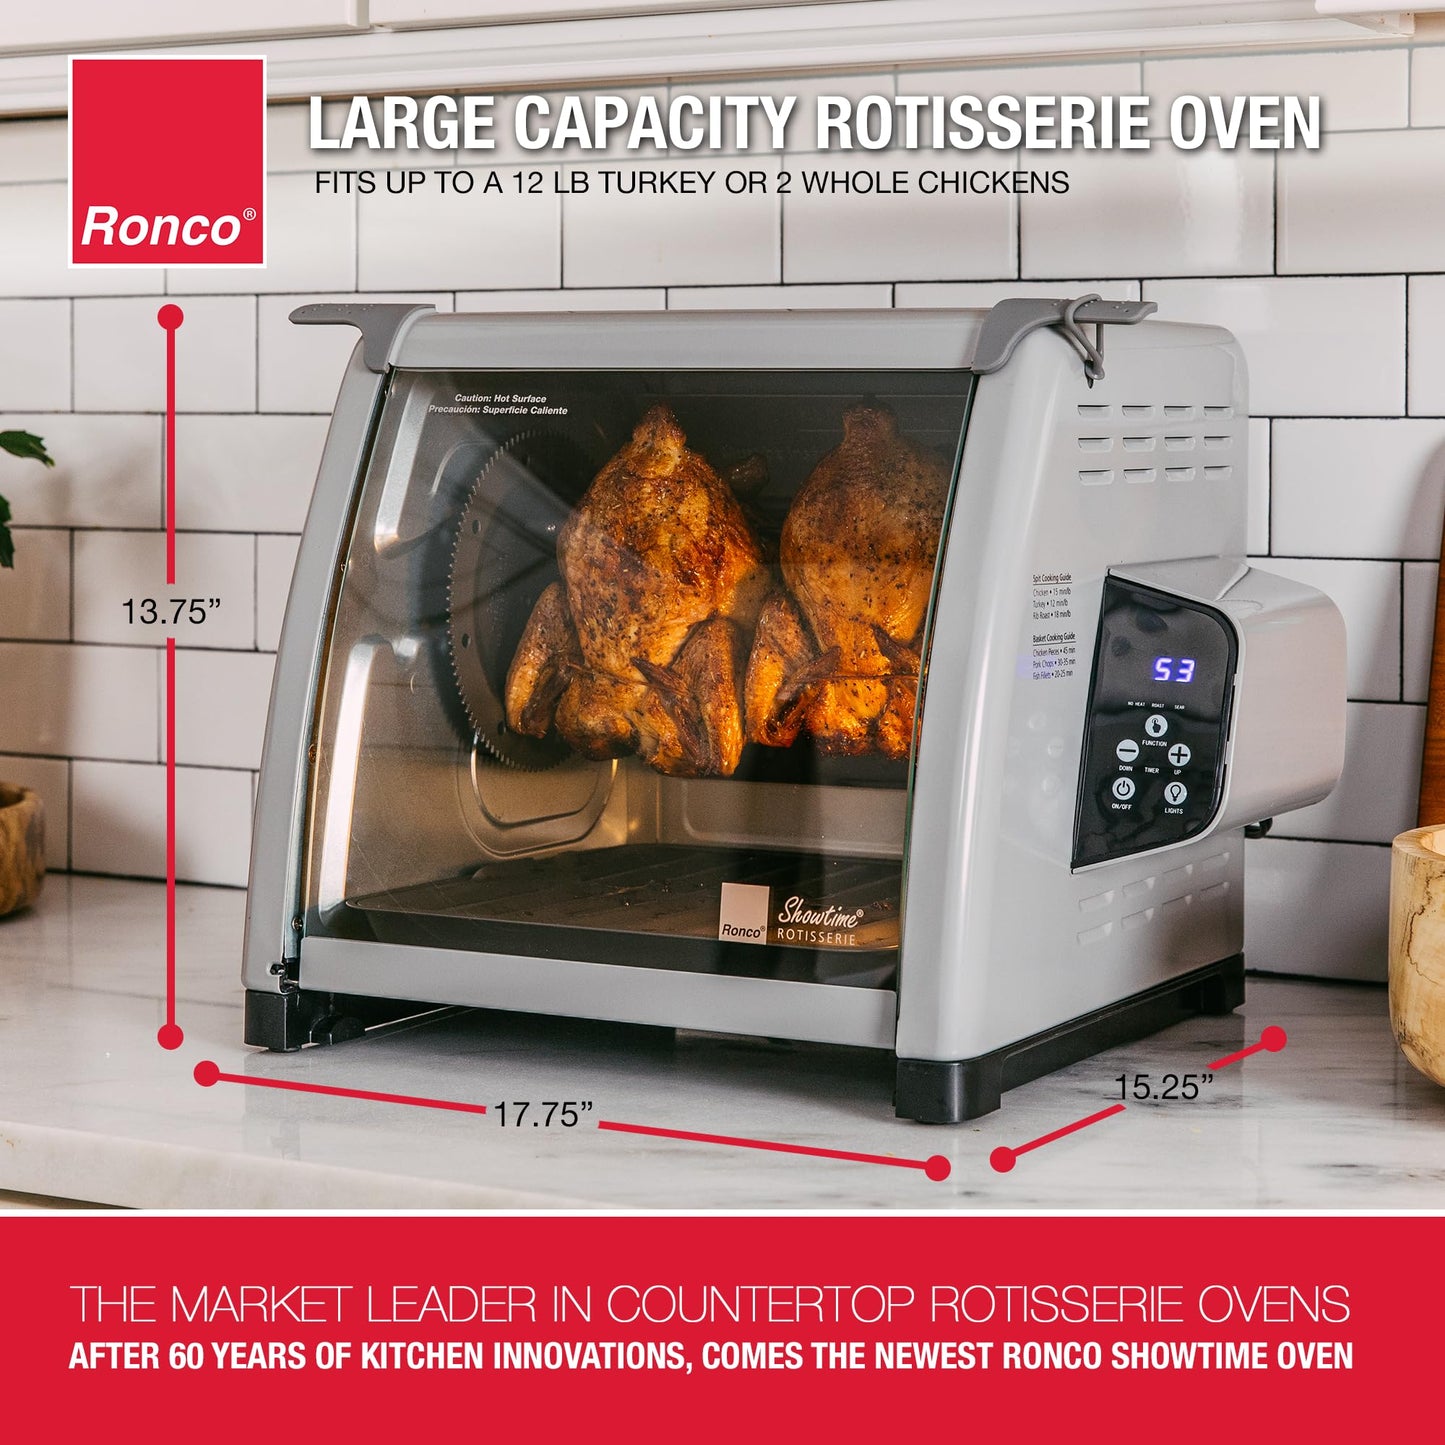 Ronco 6000 Platinum Series Rotisserie Oven, Digital Display, 12-Pound Capacity, Auto Shutoff, Includes Rotisserie Spit, Multi-Purpose Basket, 3 Cooking Functions: Rotisserie, Sear and No Heat Rotation